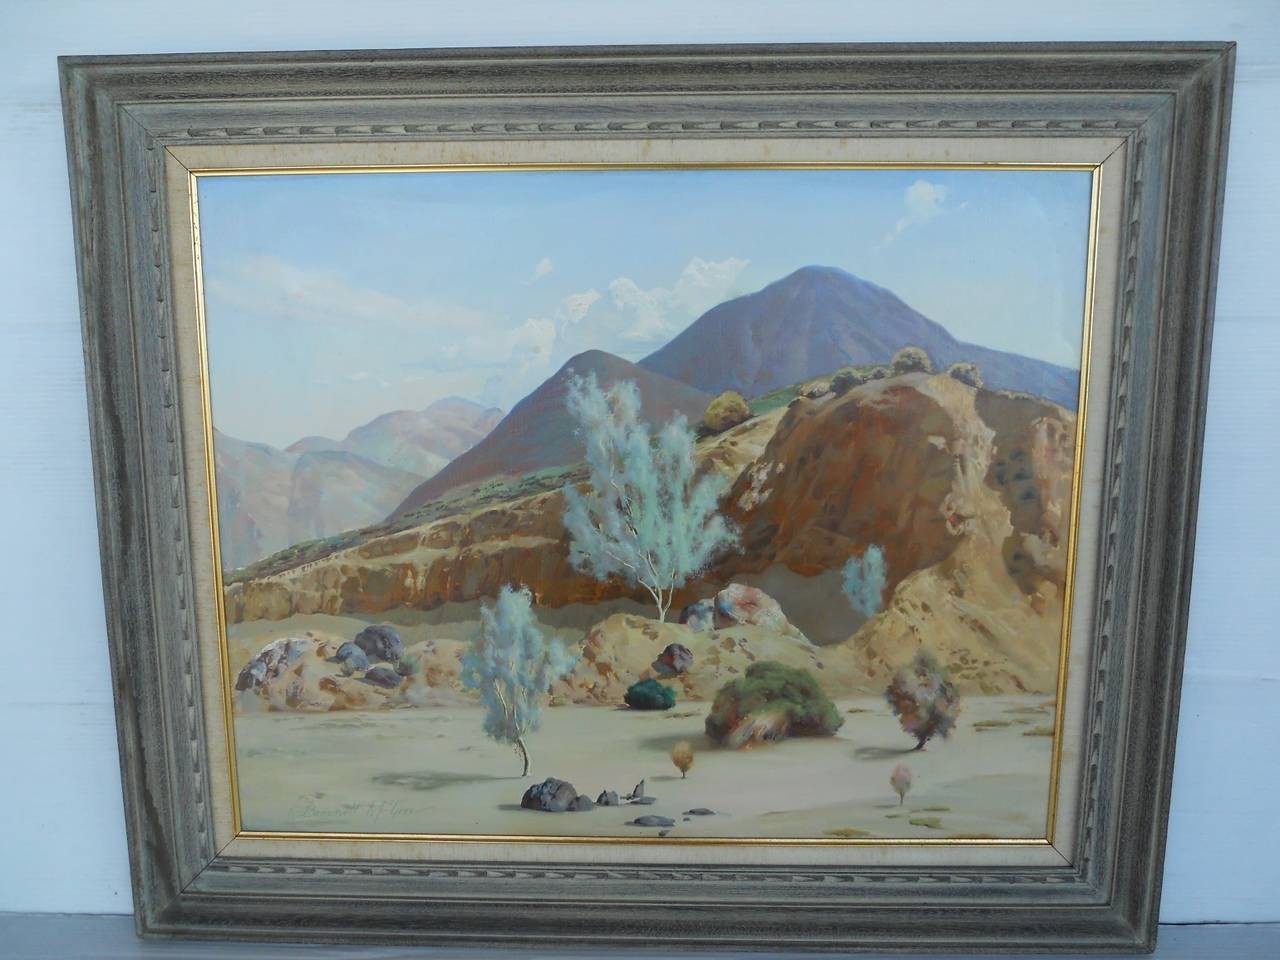 Set of two paintings by R. Brownell McGrew, signed
R. Brownell McGrew (American, 1916–1994).
The measurements listed below are for each artwork with the existing original frame. The dimensions without the frame are: 29.5